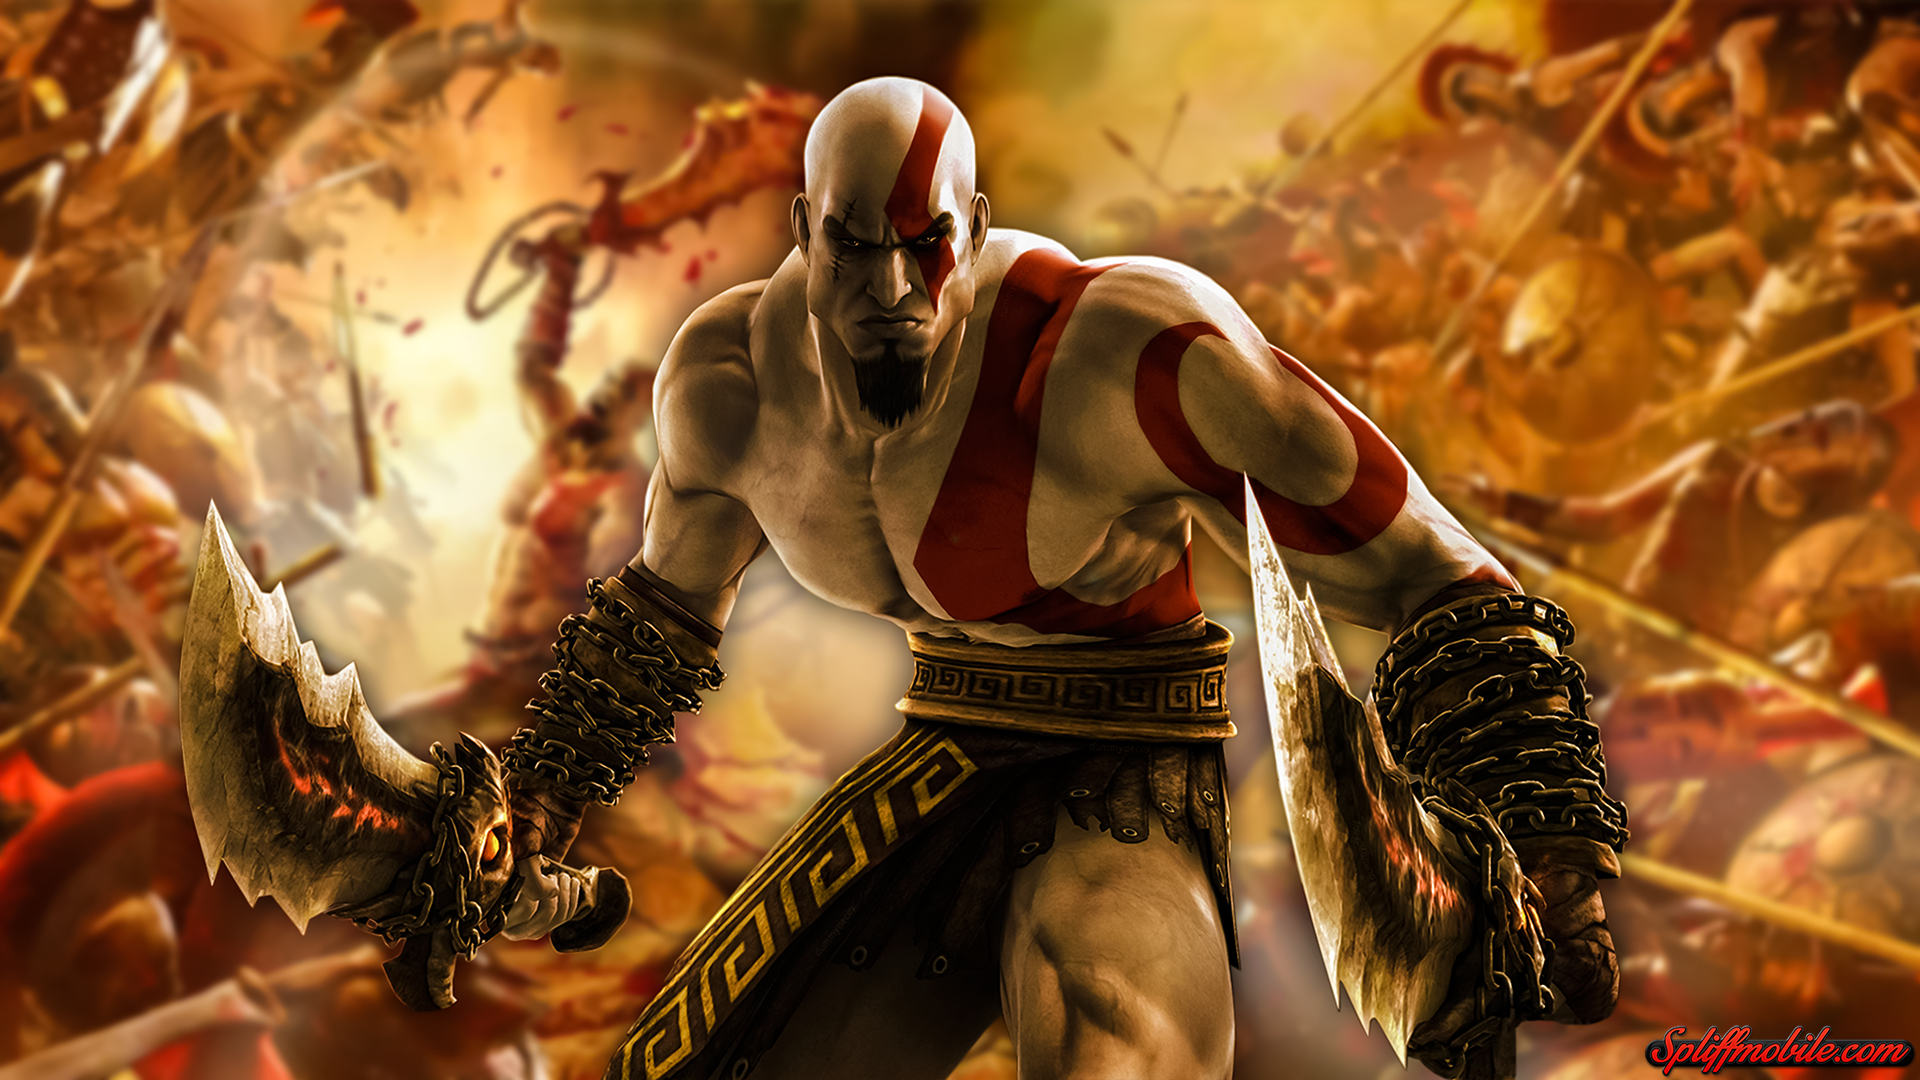 Free Download Wicked Cool God Of War Wallpaper 1920x1080 For